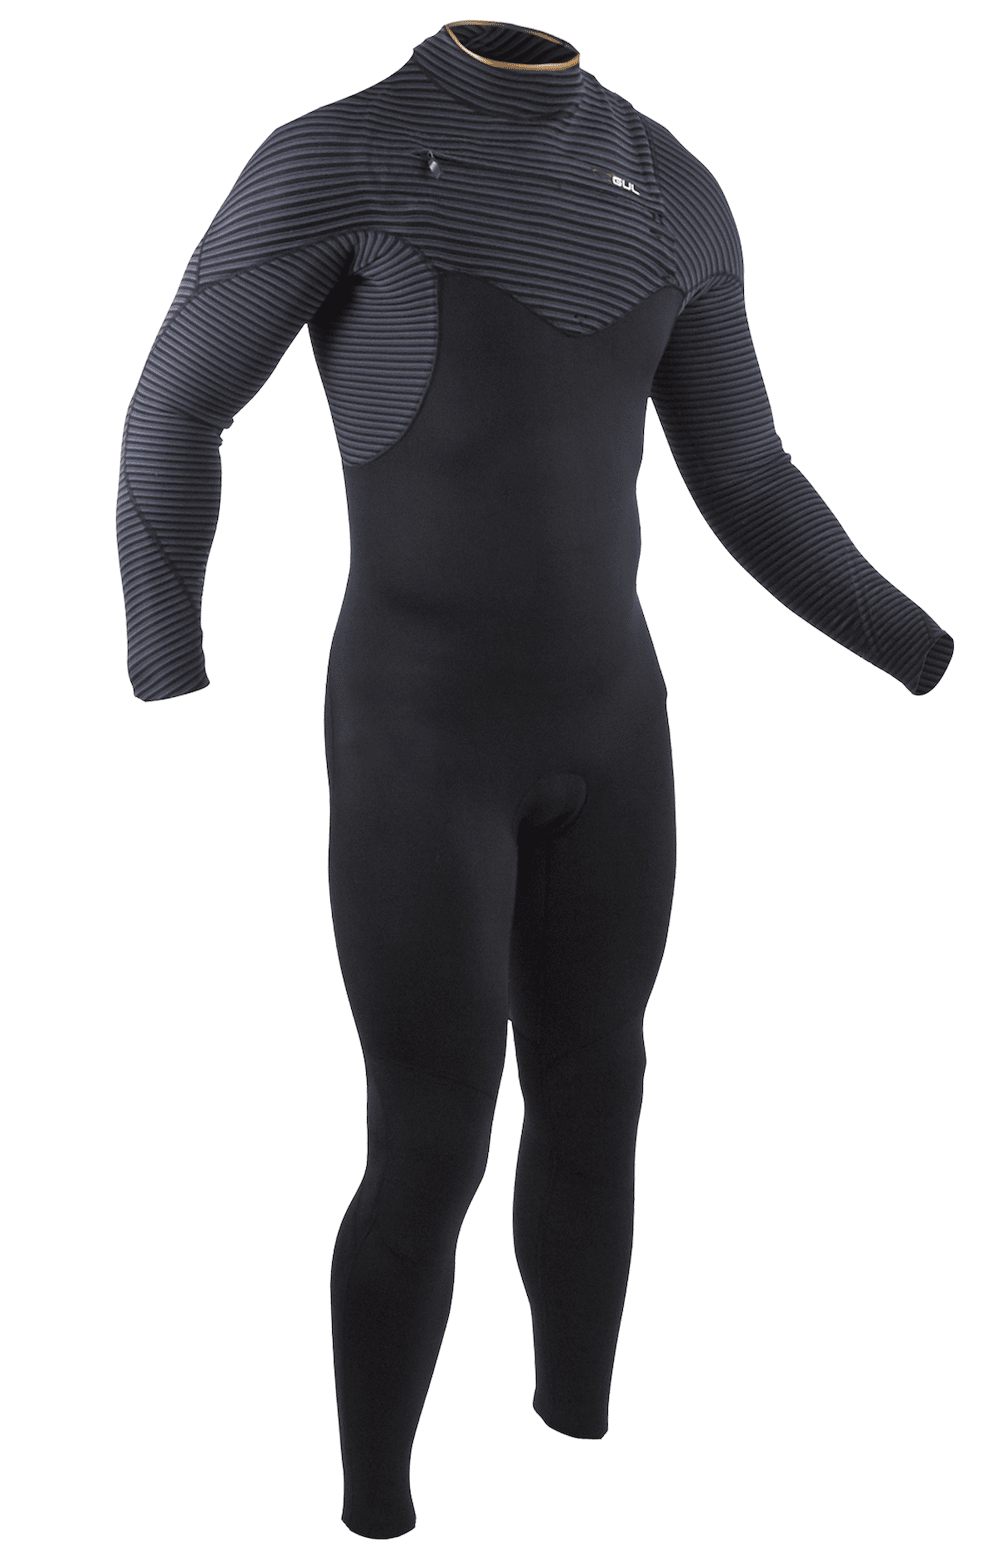 WIN A GUL 5/4 VIPER WETSUIT, BOOTS, HOOD AND DRYBAG WORTH £320 ...